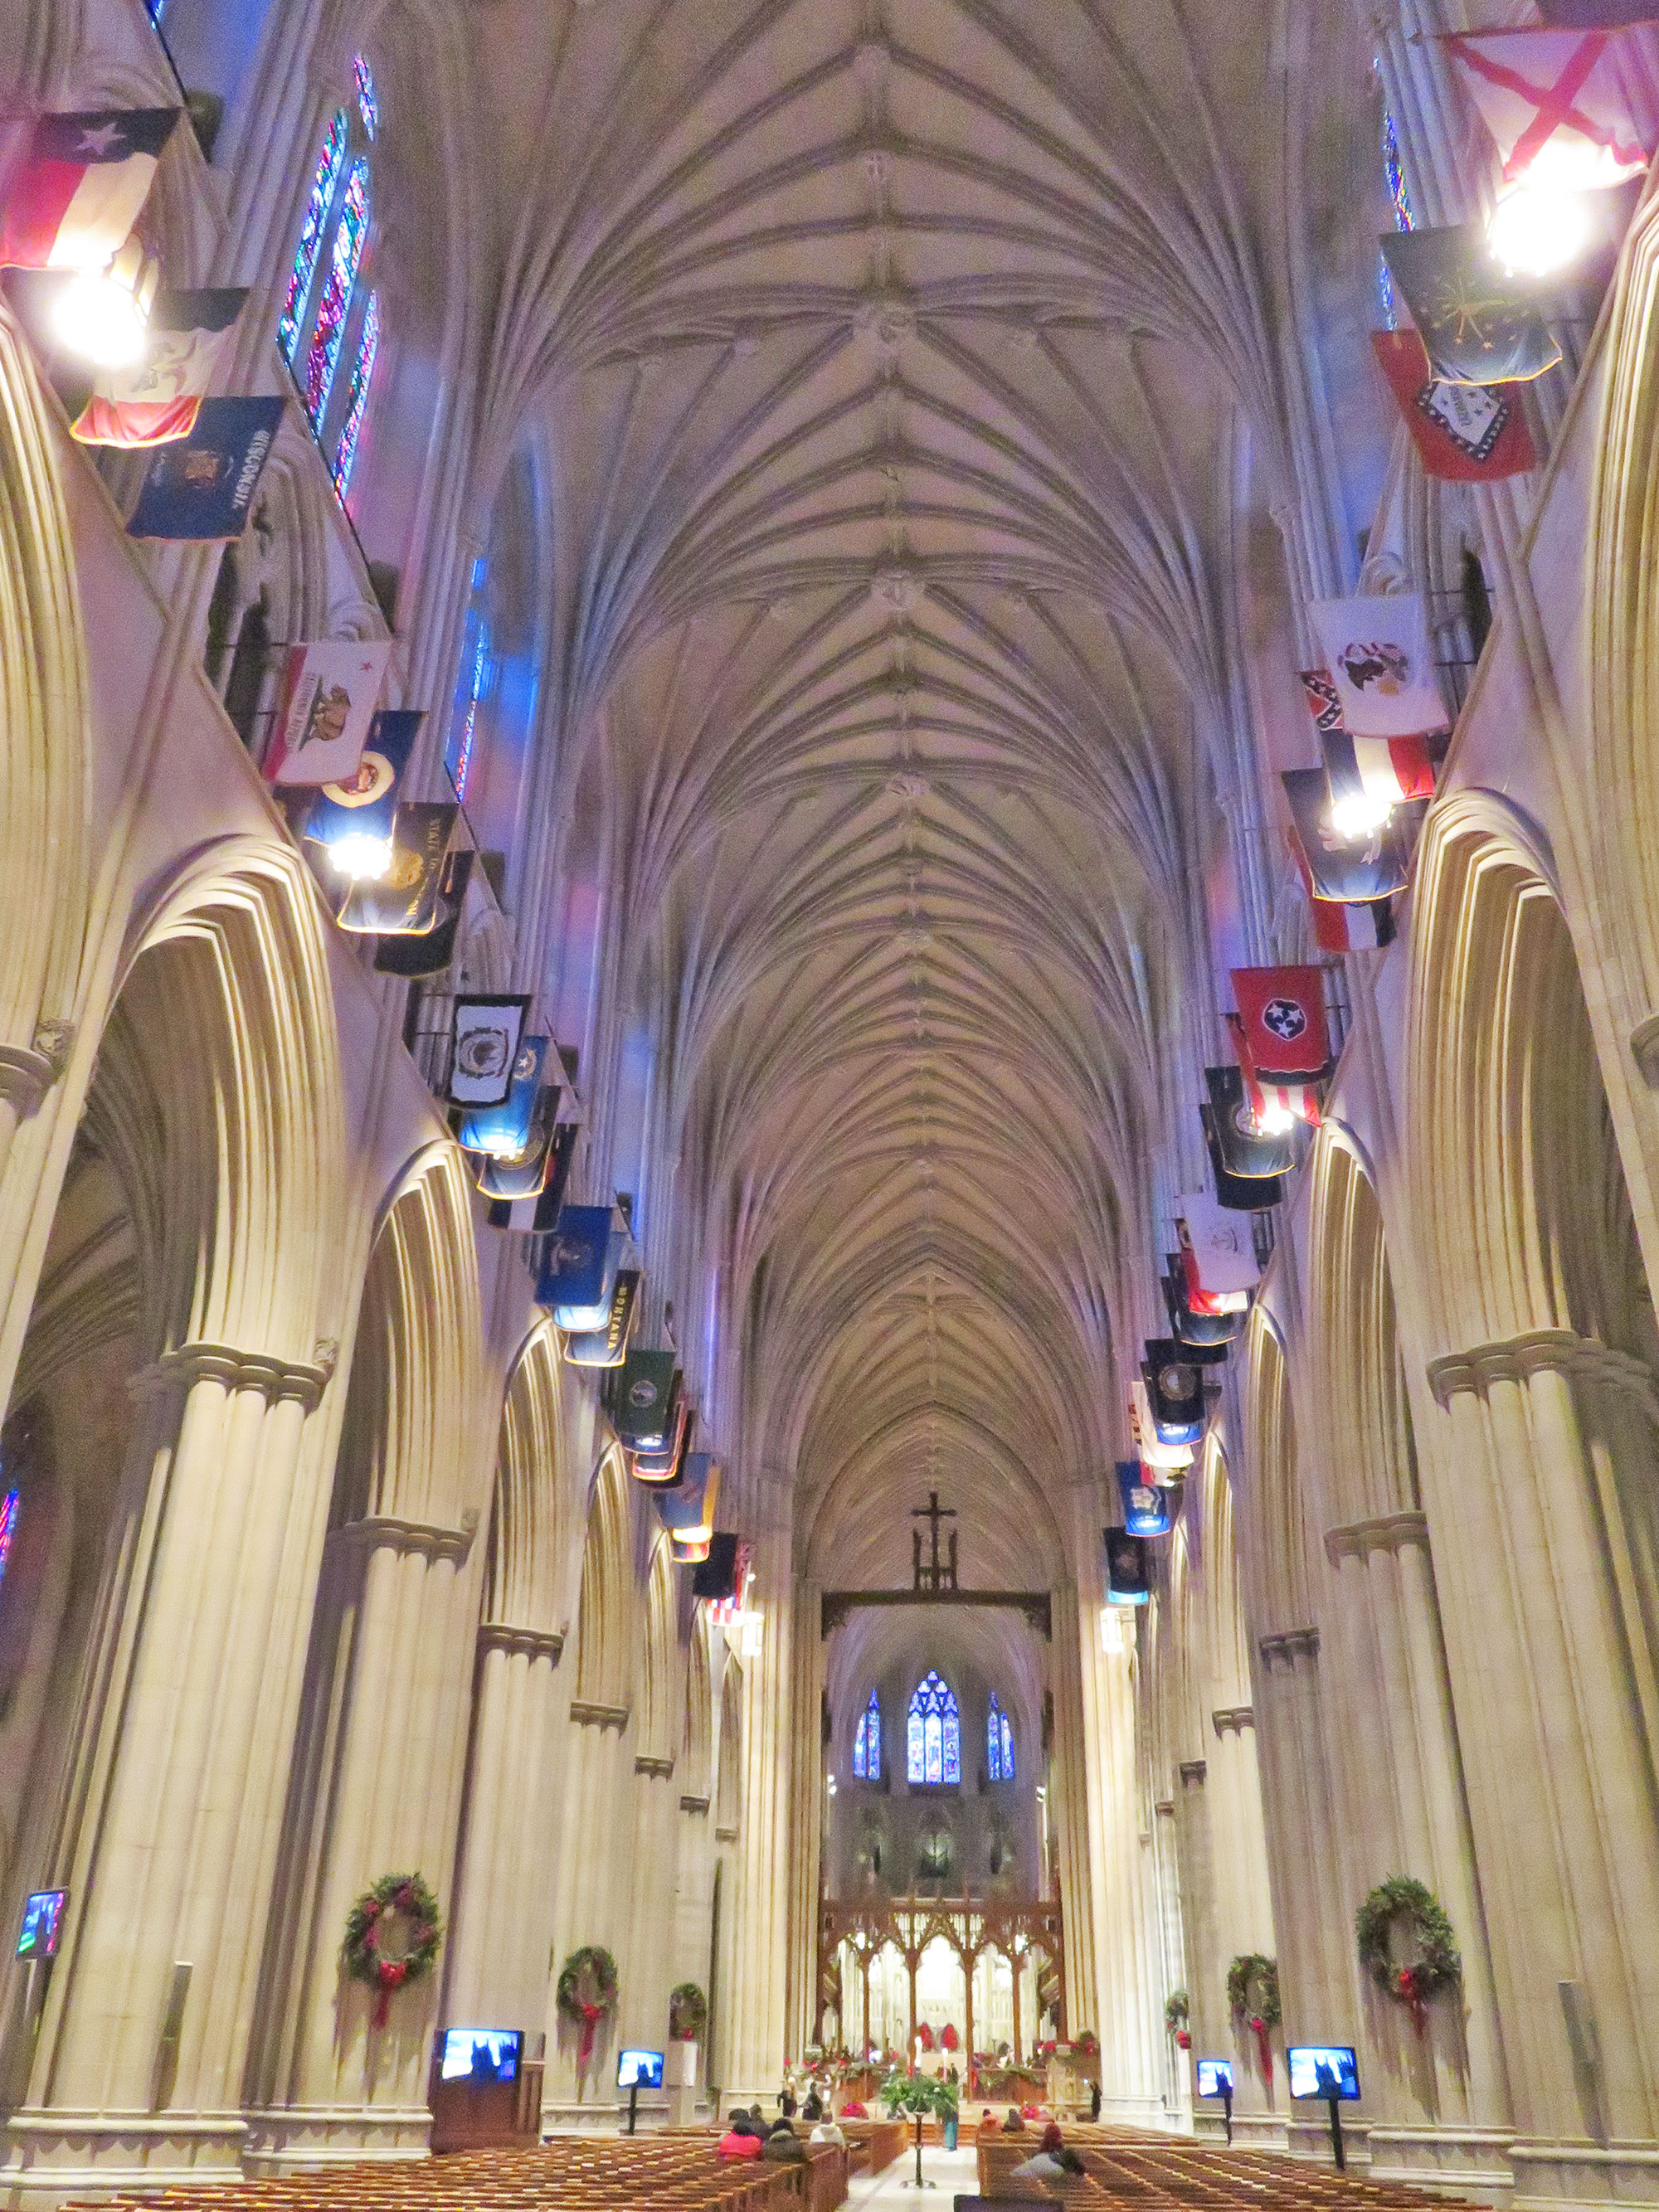 The main hall of the Washington National Cathedral.